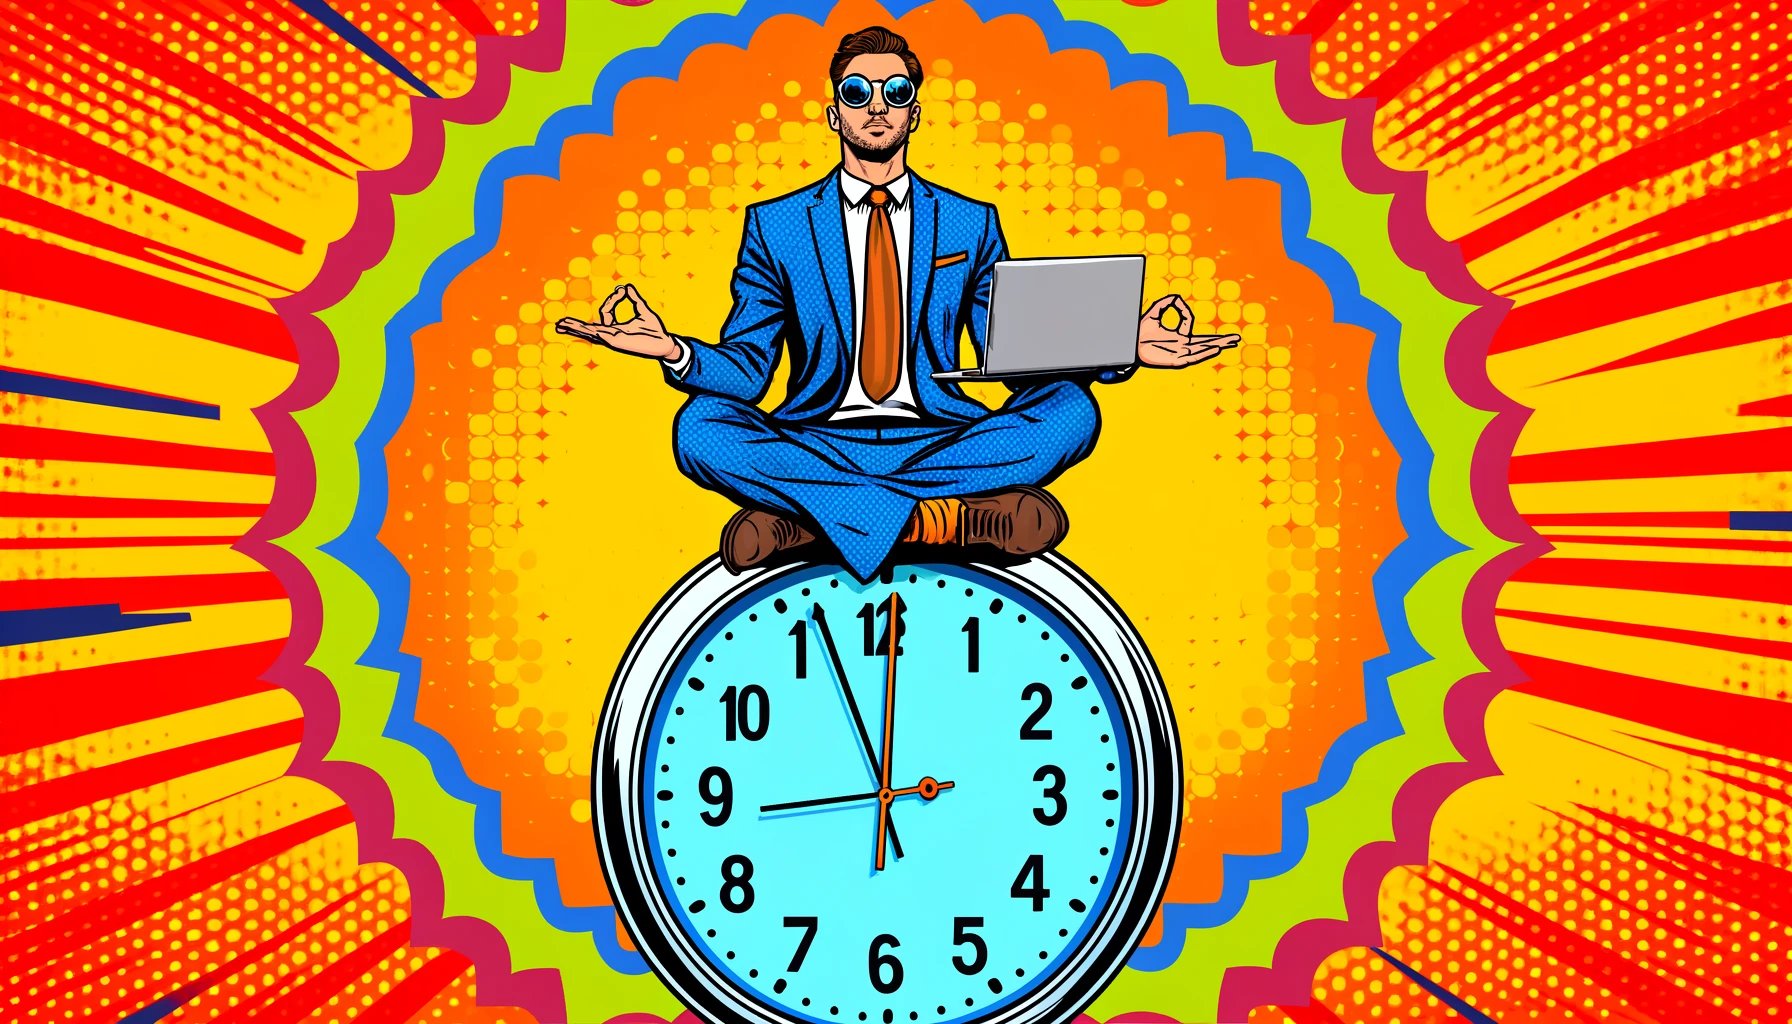 DALL·E 2024-05-20 15.24.11 - A pop art style image inspired by a scene where a person is sitting cross-legged on top of a large clock, holding a laptop and making a meditation ges